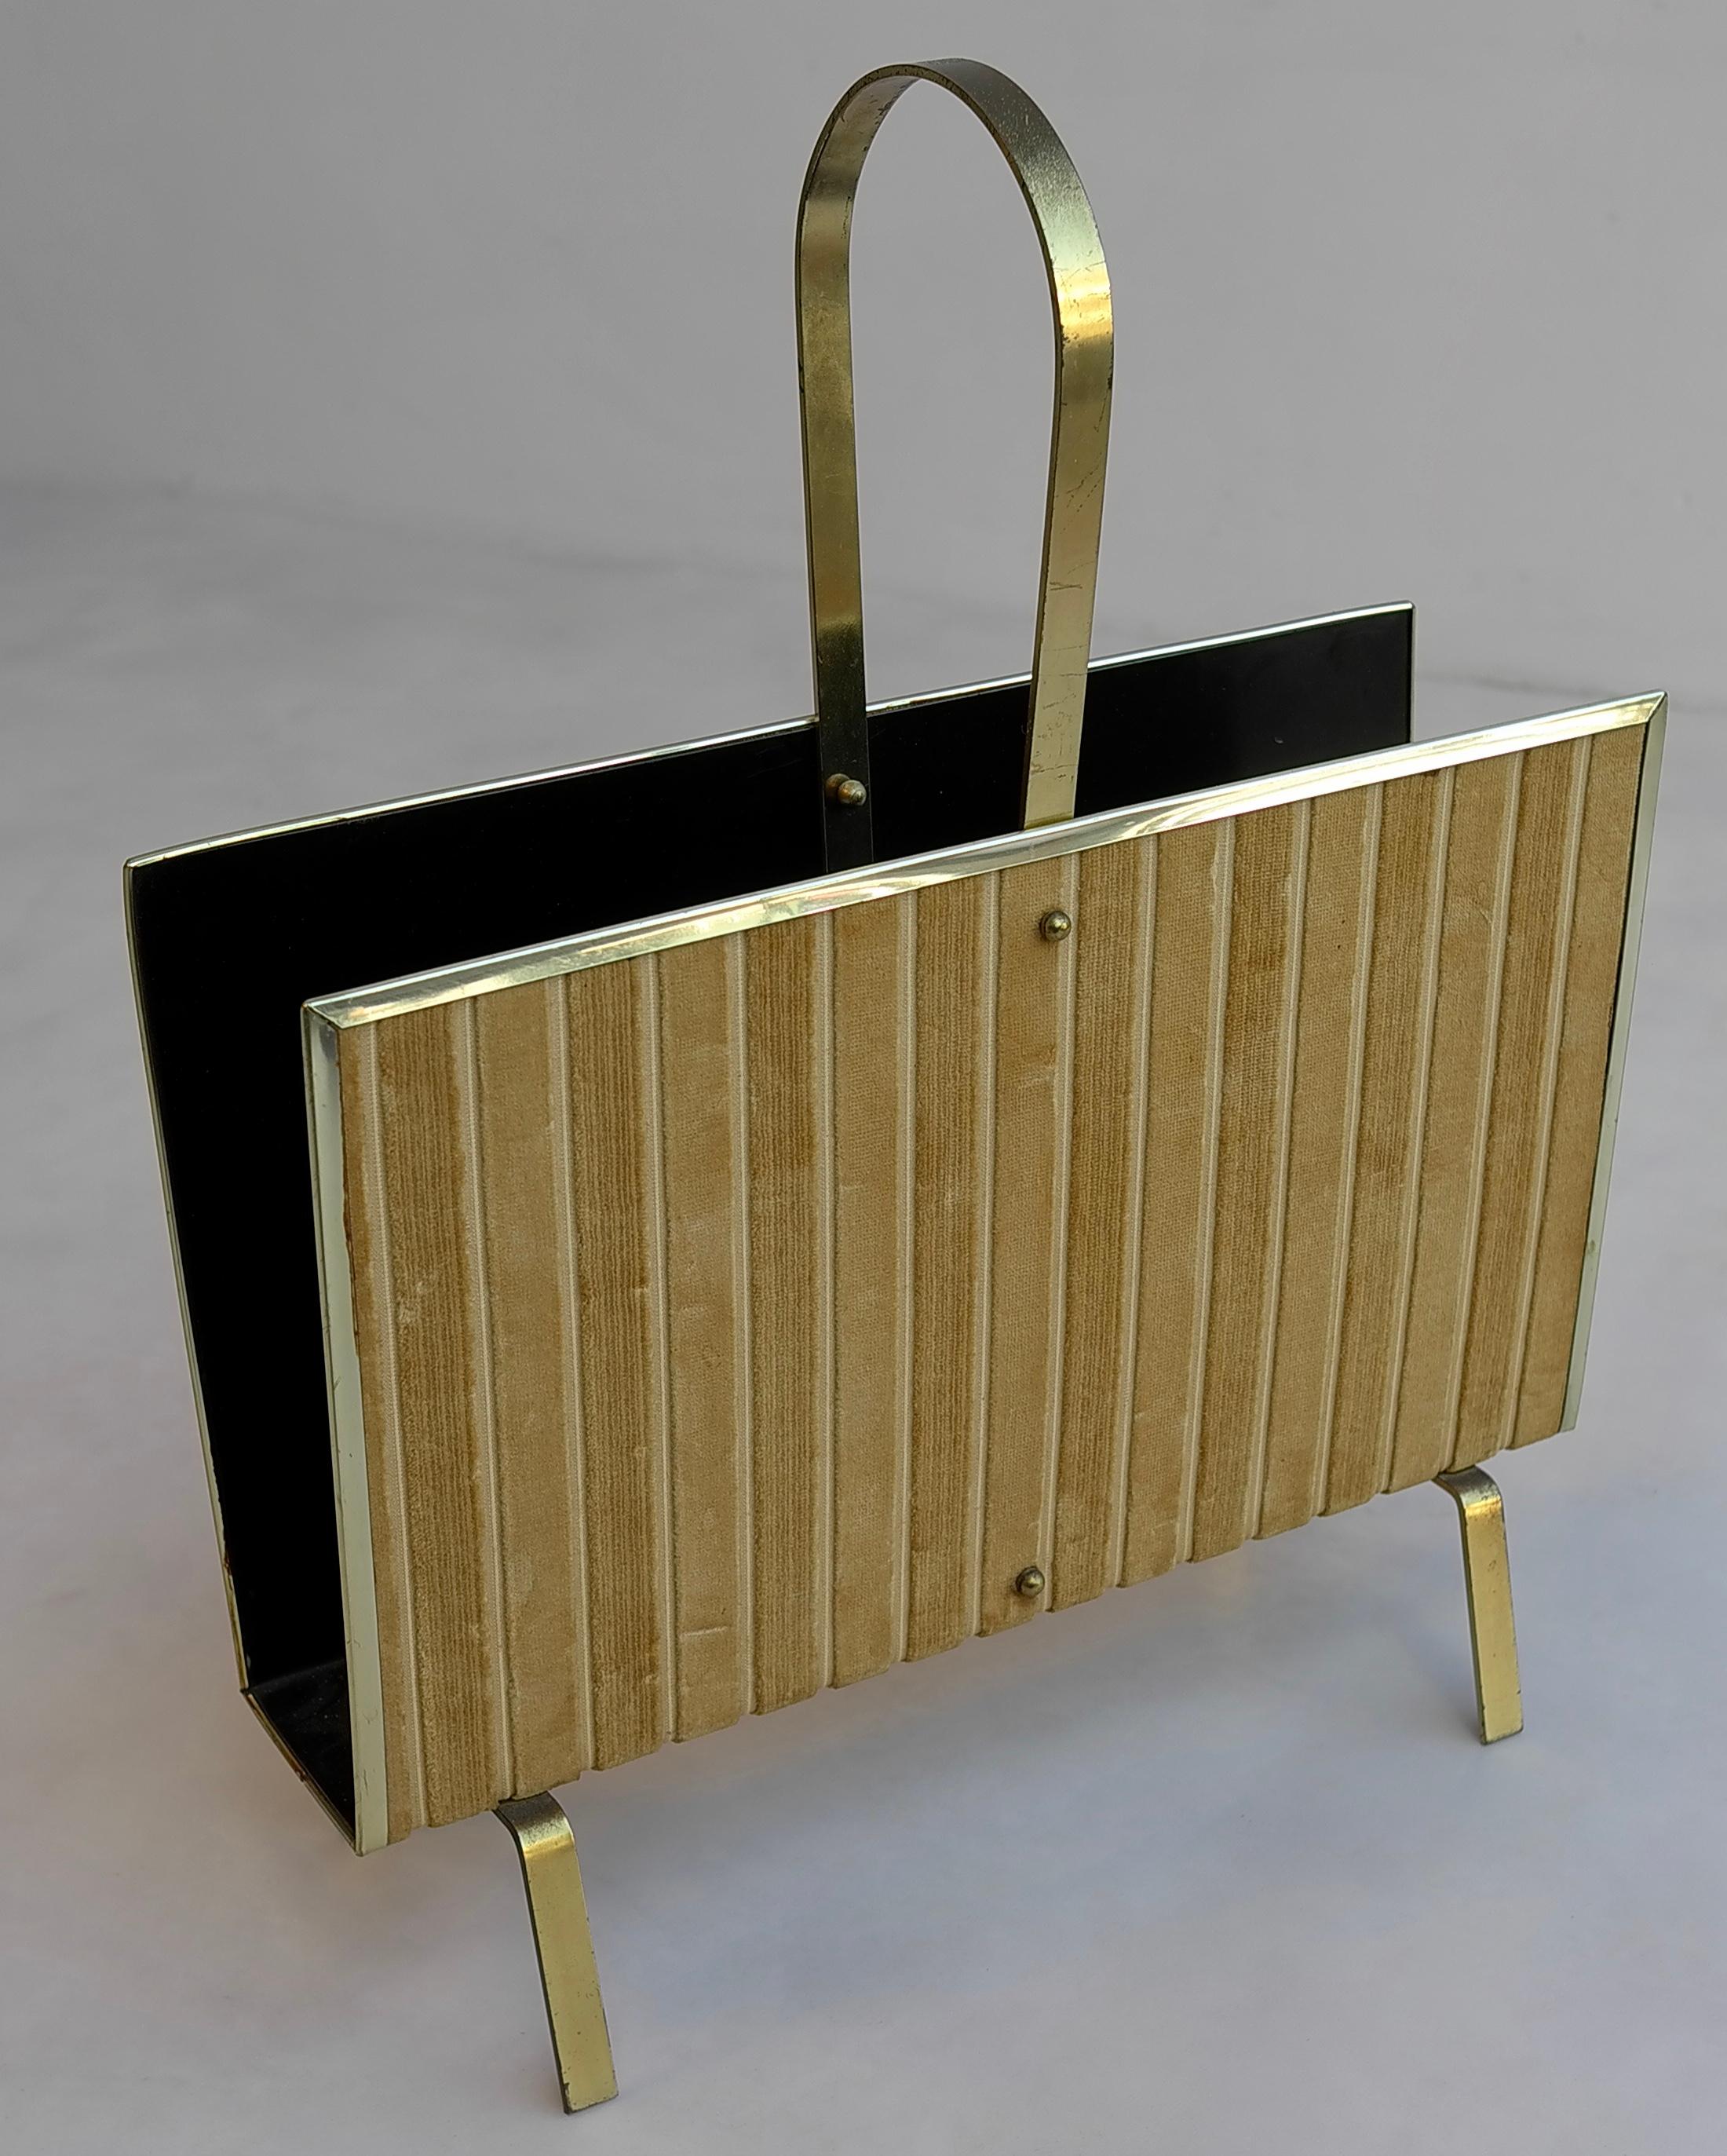 Velvet magazine rack with decorative brass feet gold color plastic rim and brass handle for ease of carrying.